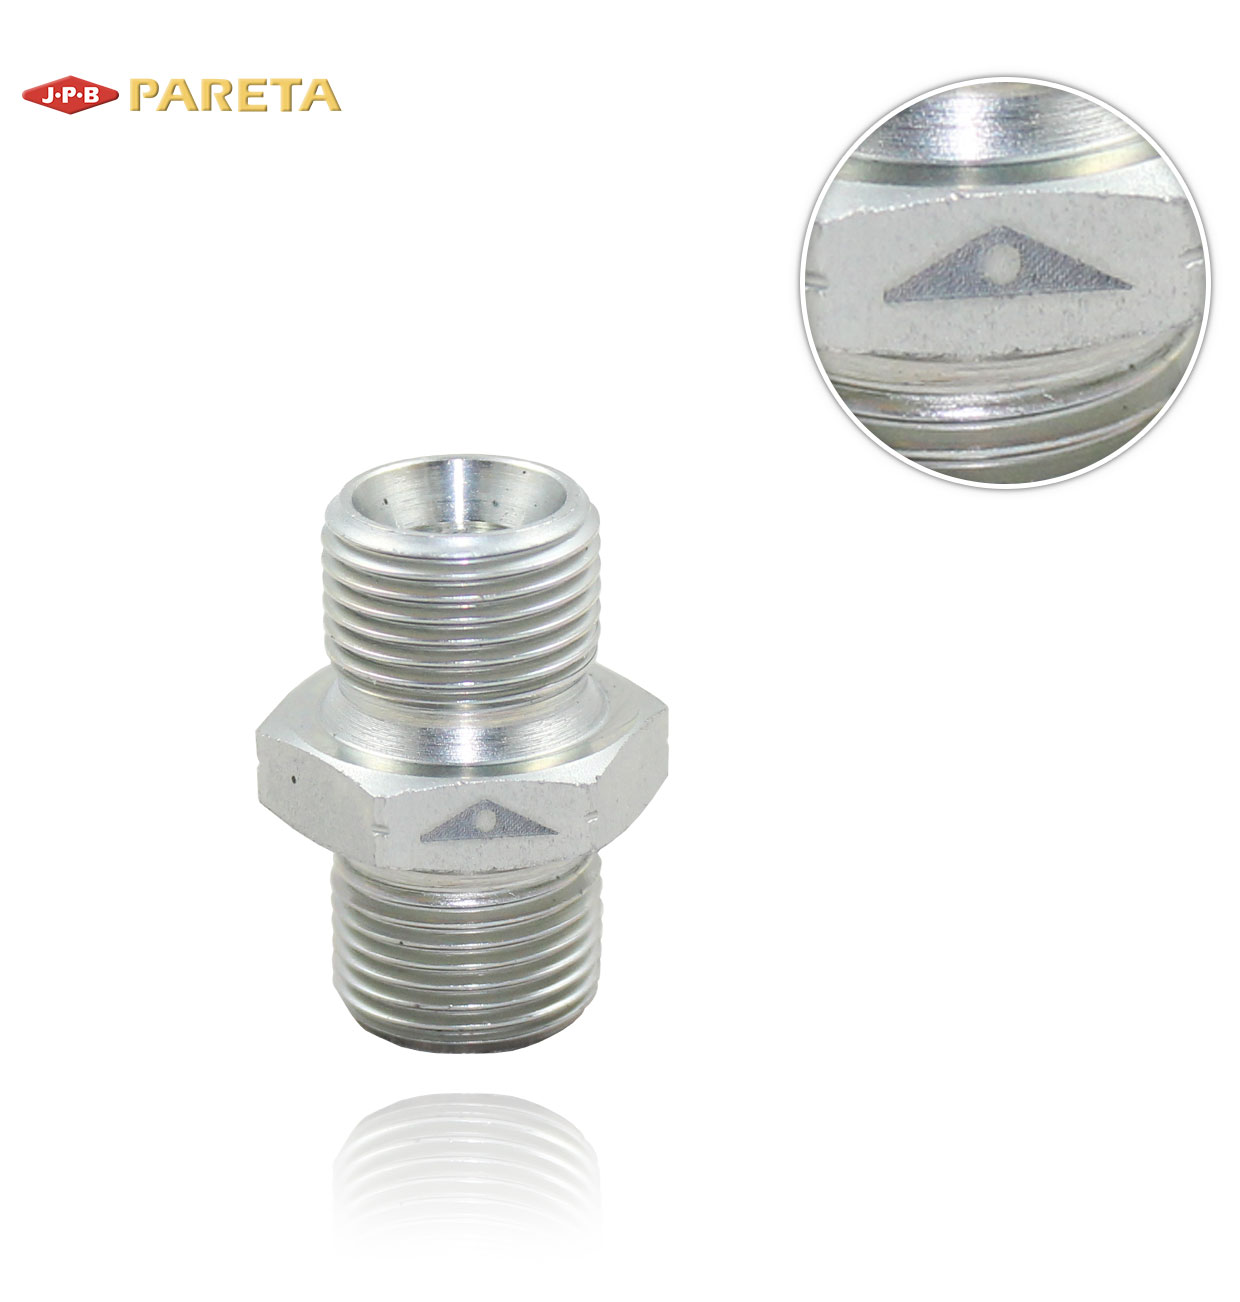 3/8"M x 3/8"M CONICAL CONNECTOR